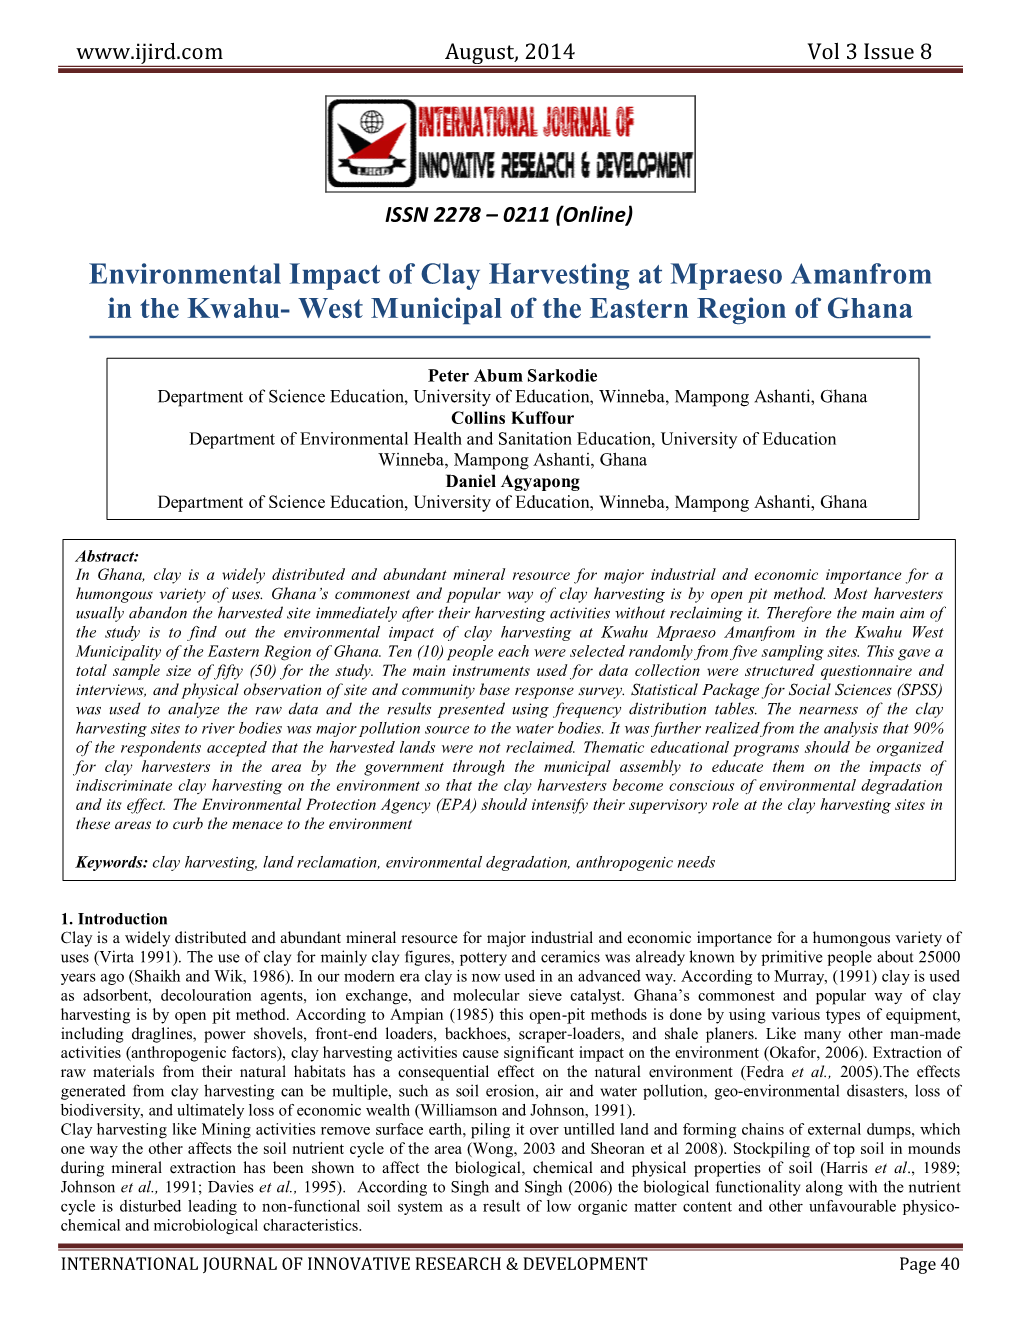 Environmental Impact of Clay Harvesting at Mpraeso Amanfrom in the Kwahu- West Municipal of the Eastern Region of Ghana